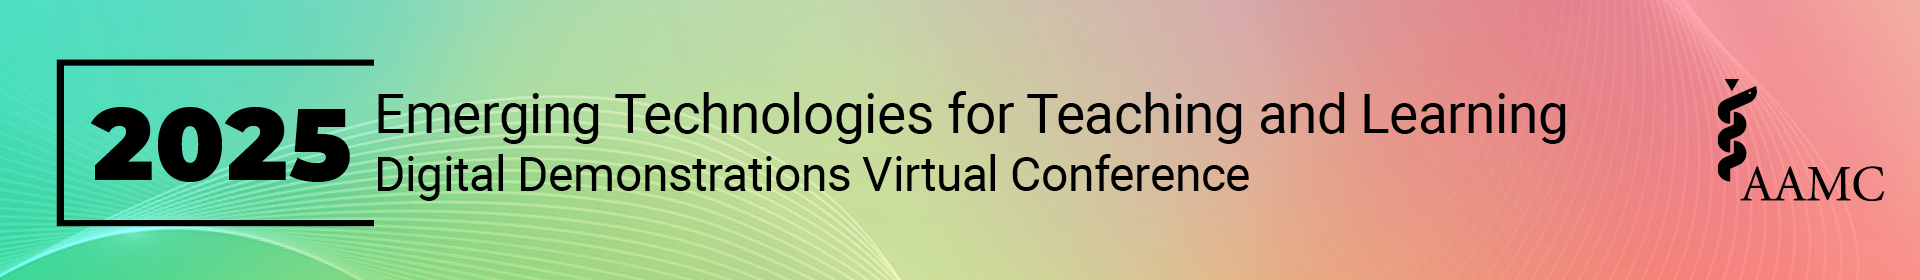 2025 Emerging Technologies for Teaching and Learning: Digital Demonstrations Virtual Conference Event Banner